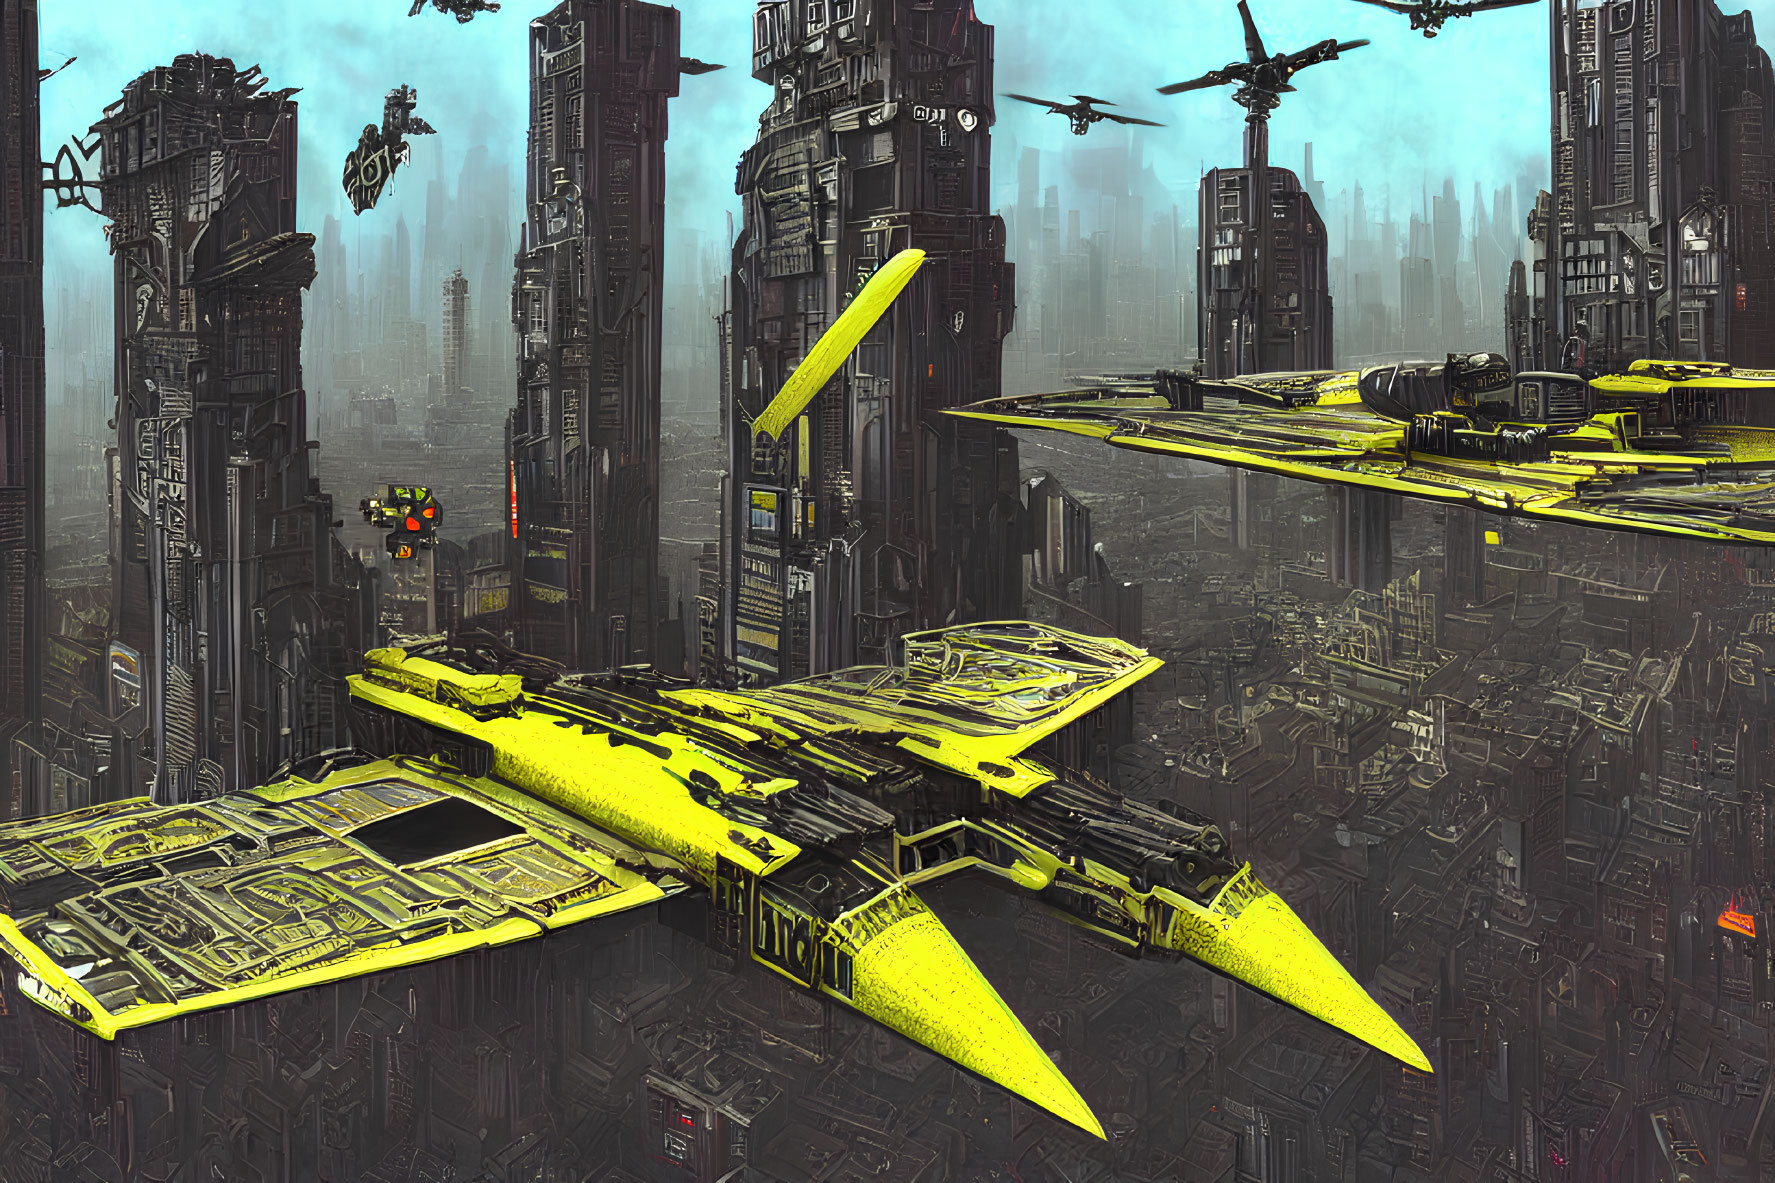 Futuristic cityscape with skyscrapers, flying vehicles, yellow platforms, and hazy background